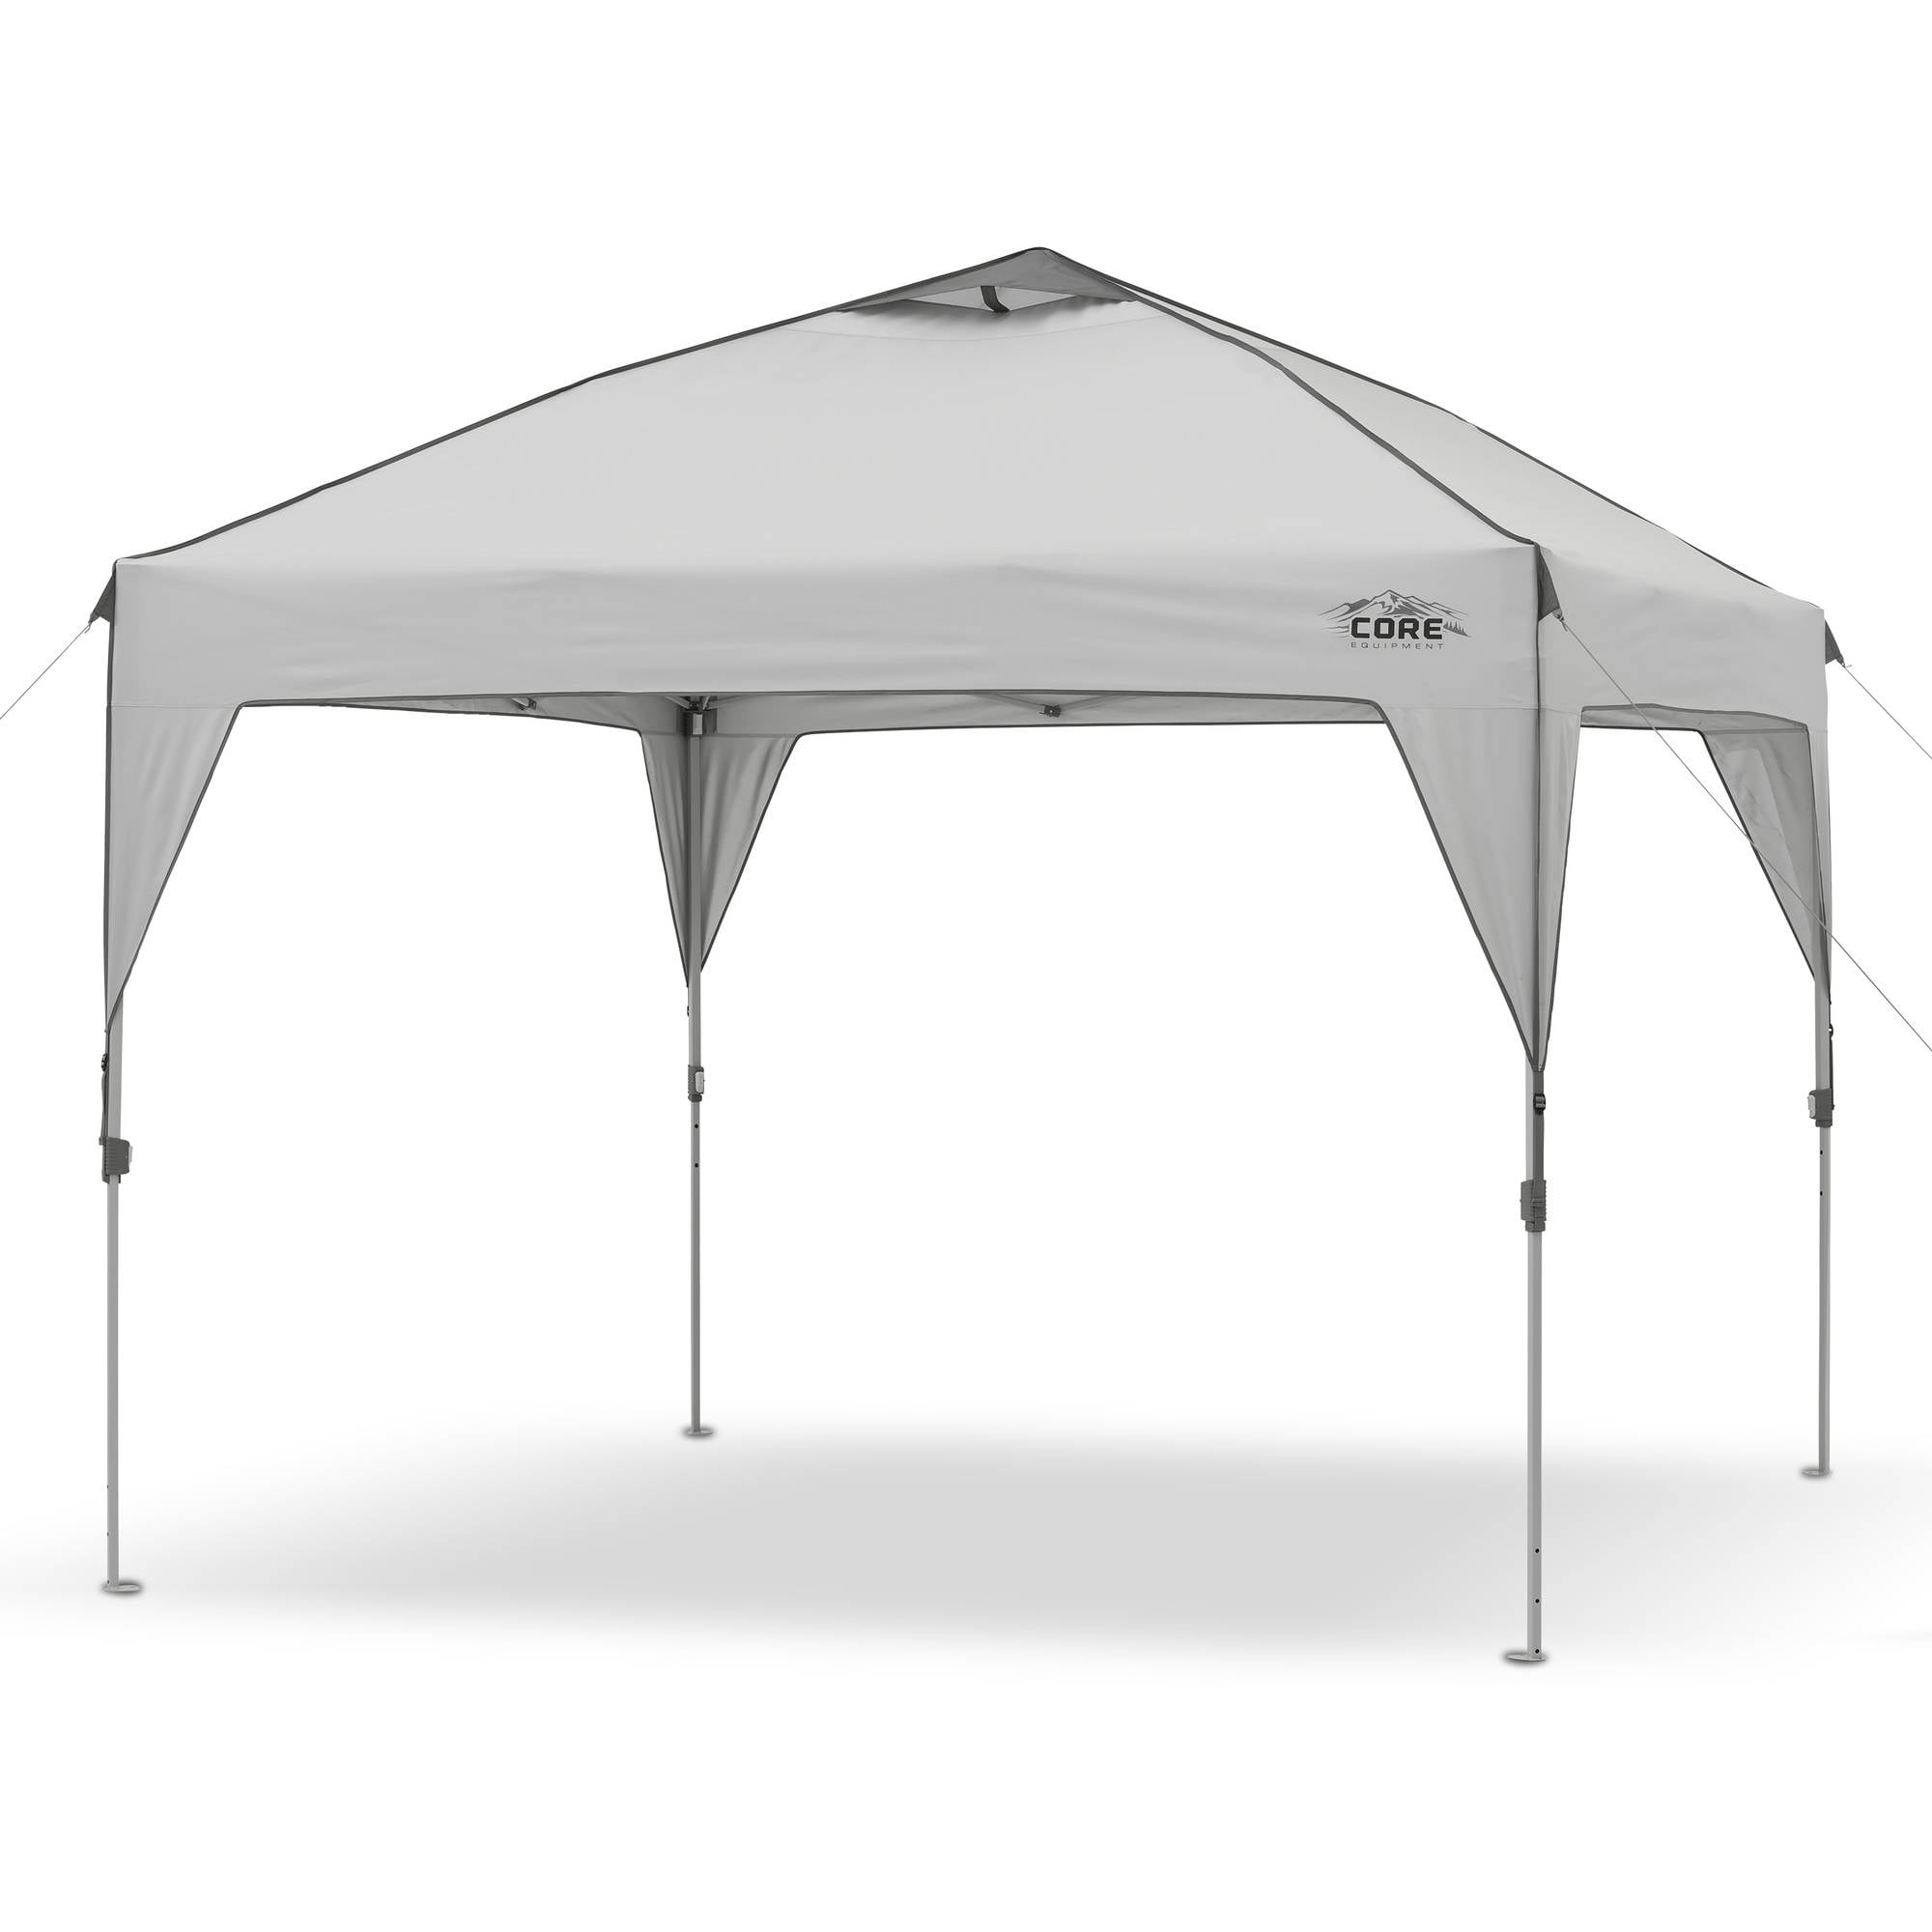 White Yescom 10x10 1080D EZ Pop Up Canopy Tent Heavy Duty Outdoor Party Portable Folding Shade with Carry Bag